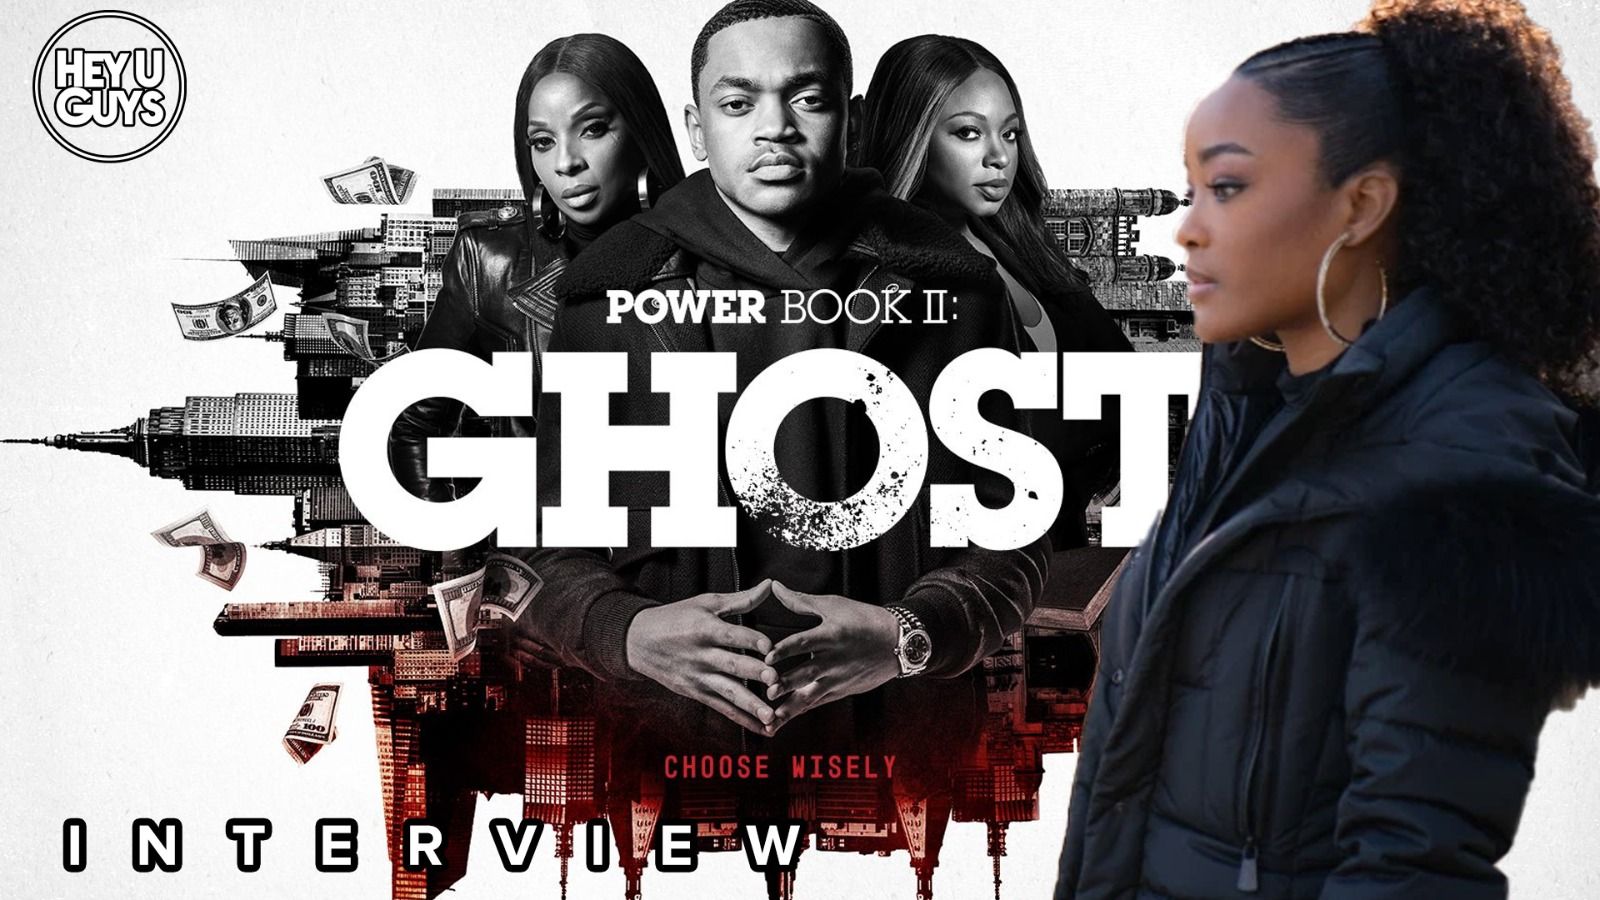 Exclusive: Michael Rainey Jnr and LaToya Tonodeo talk Power Book II: Ghost and the surprises in store for fans of the original show